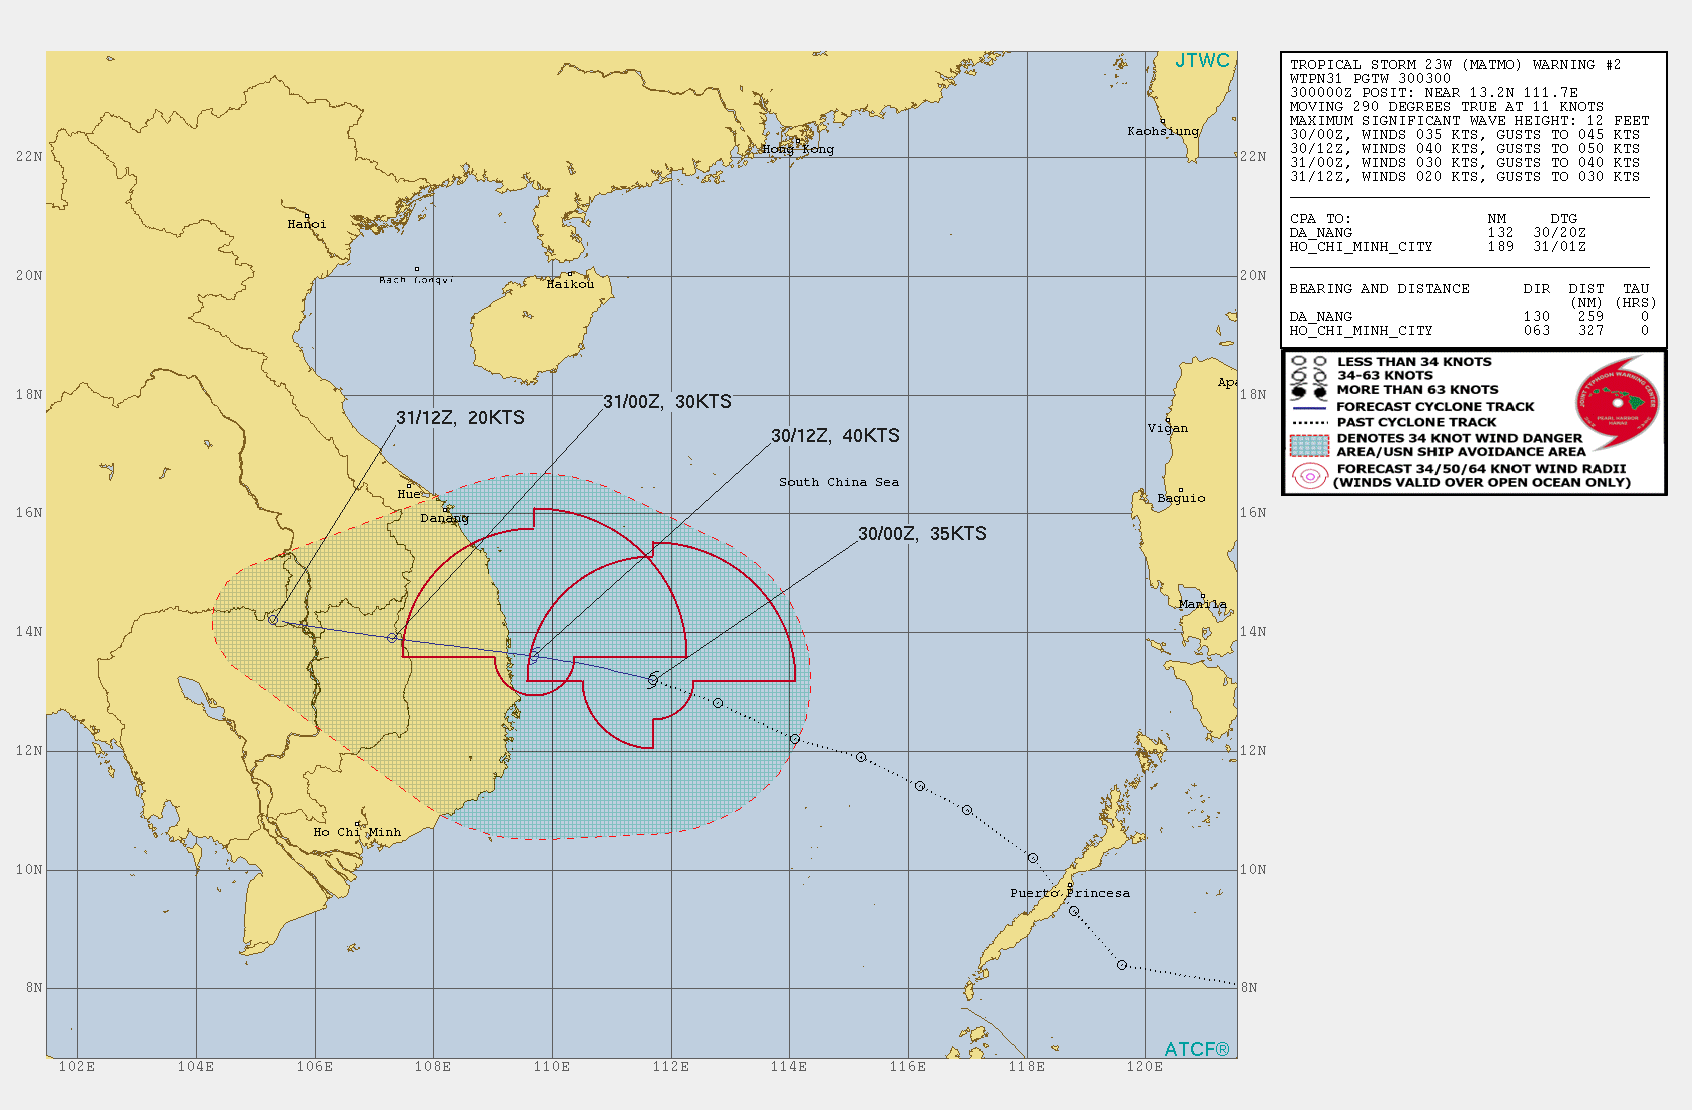 TS 23W: PEAK INTENSITY OF 40KNOTS FORECAST WITHIN 12H